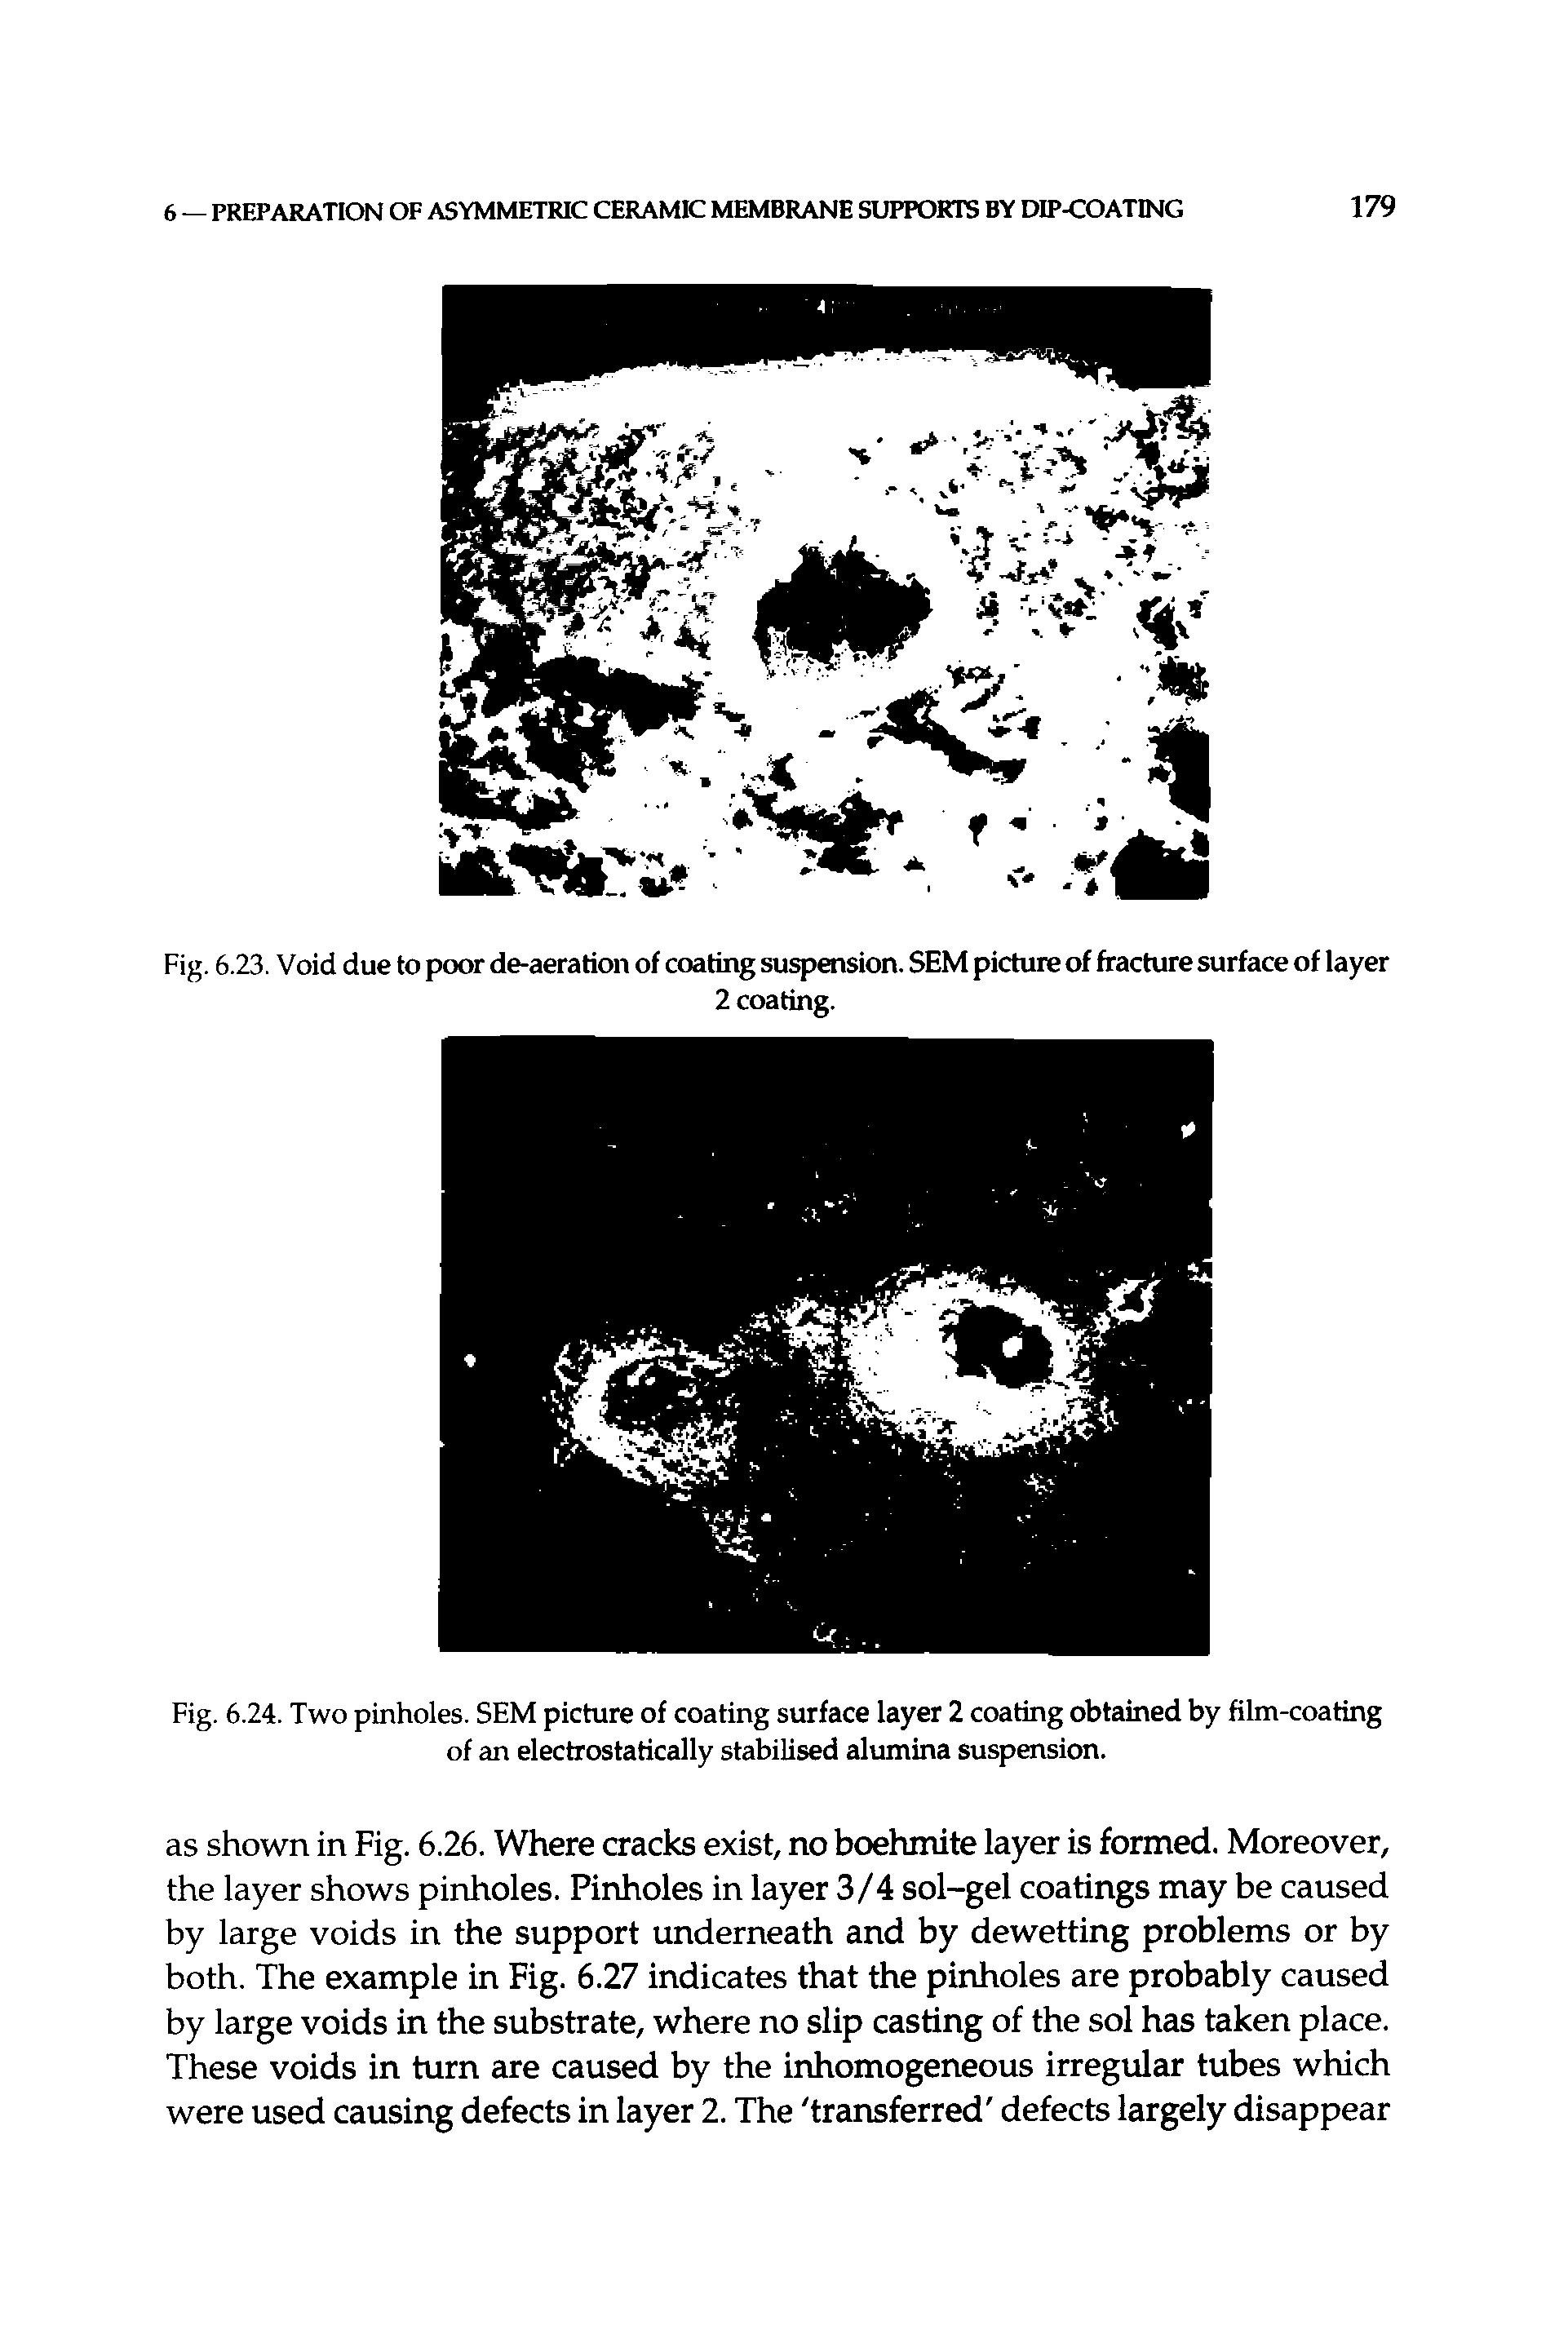 Fig. 6.24. Two pinholes. SEM picture of coating surface layer 2 coating obtained by film-coating of an electrostatically stabilised alumina suspension.